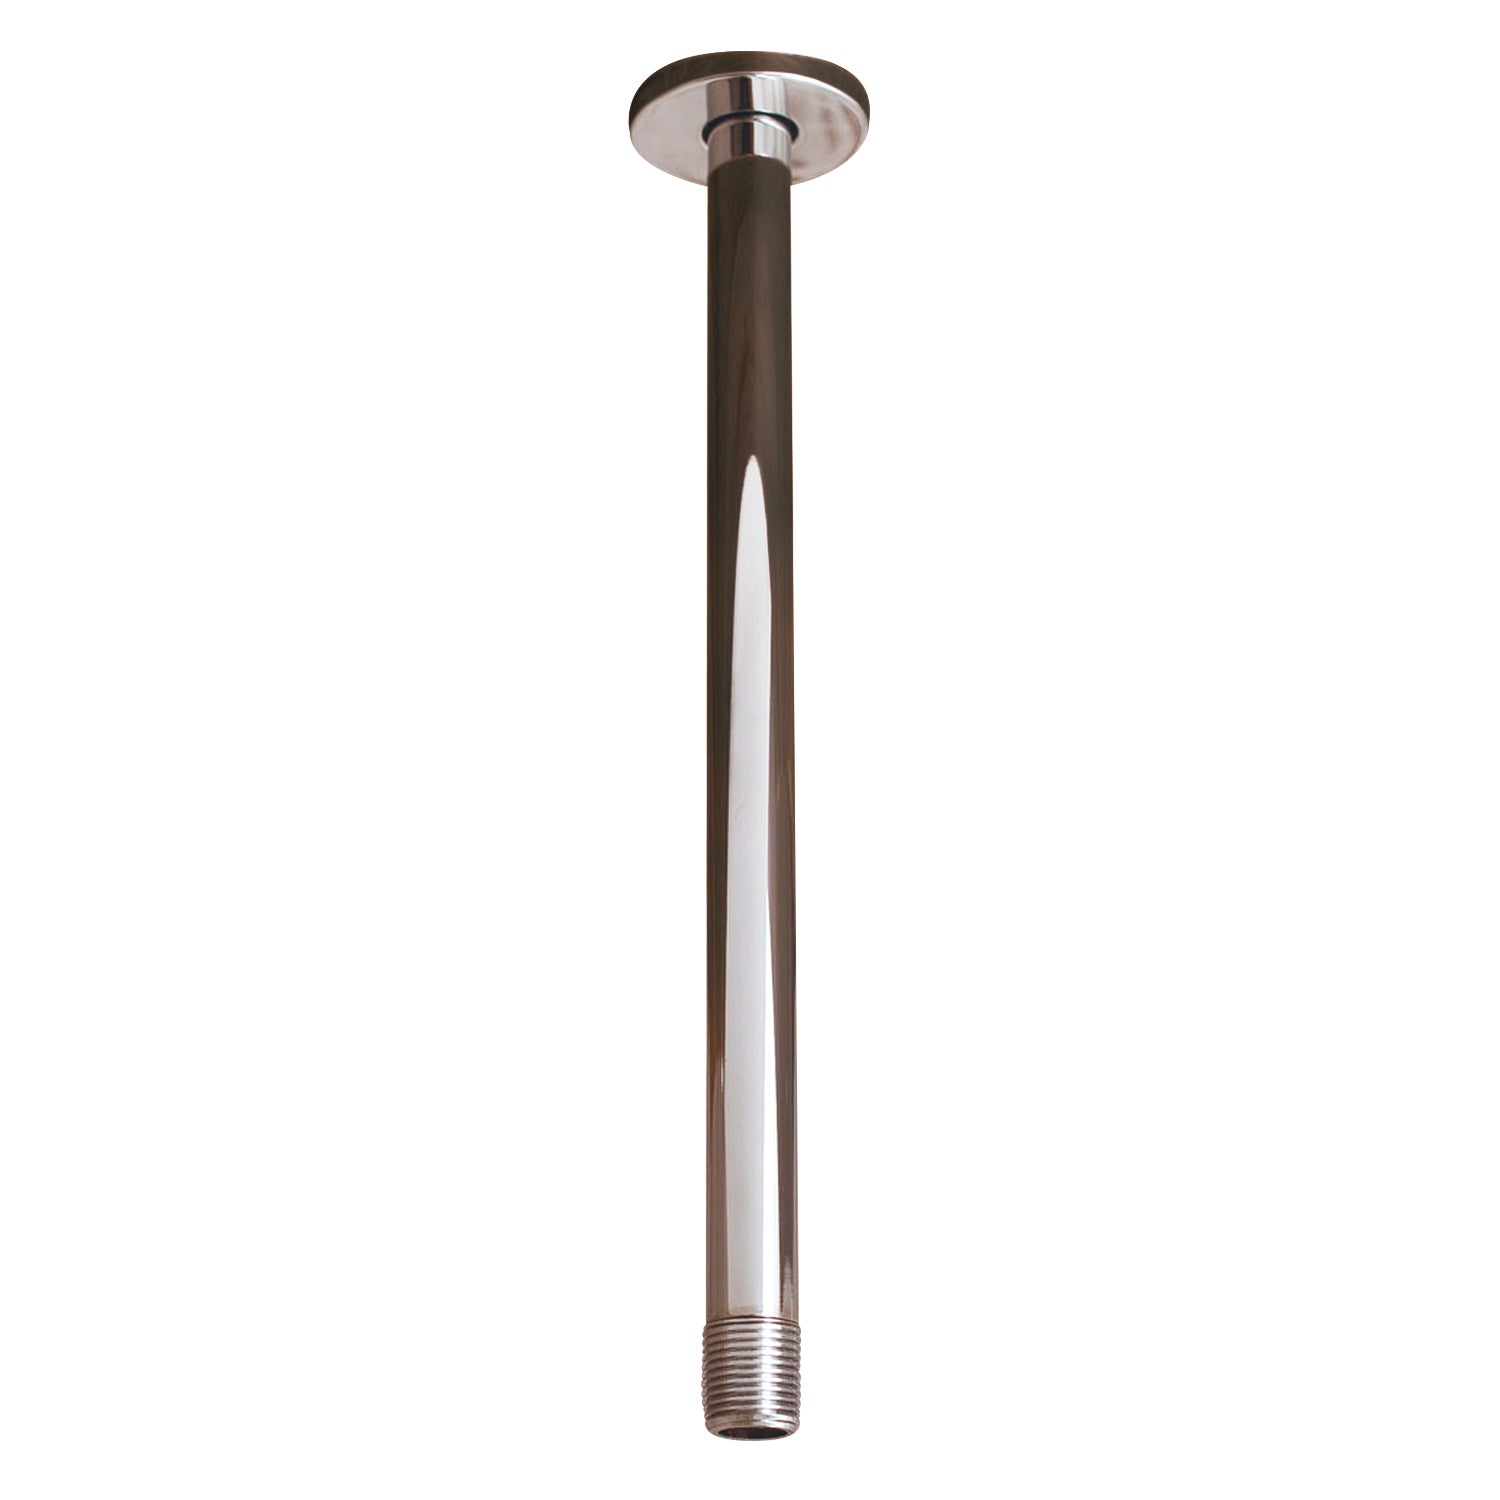 DAX Round Shower Arm, Brass Body, Ceiling Mount, Chrome Finish, 12 Inches (D-F18-12-CR)